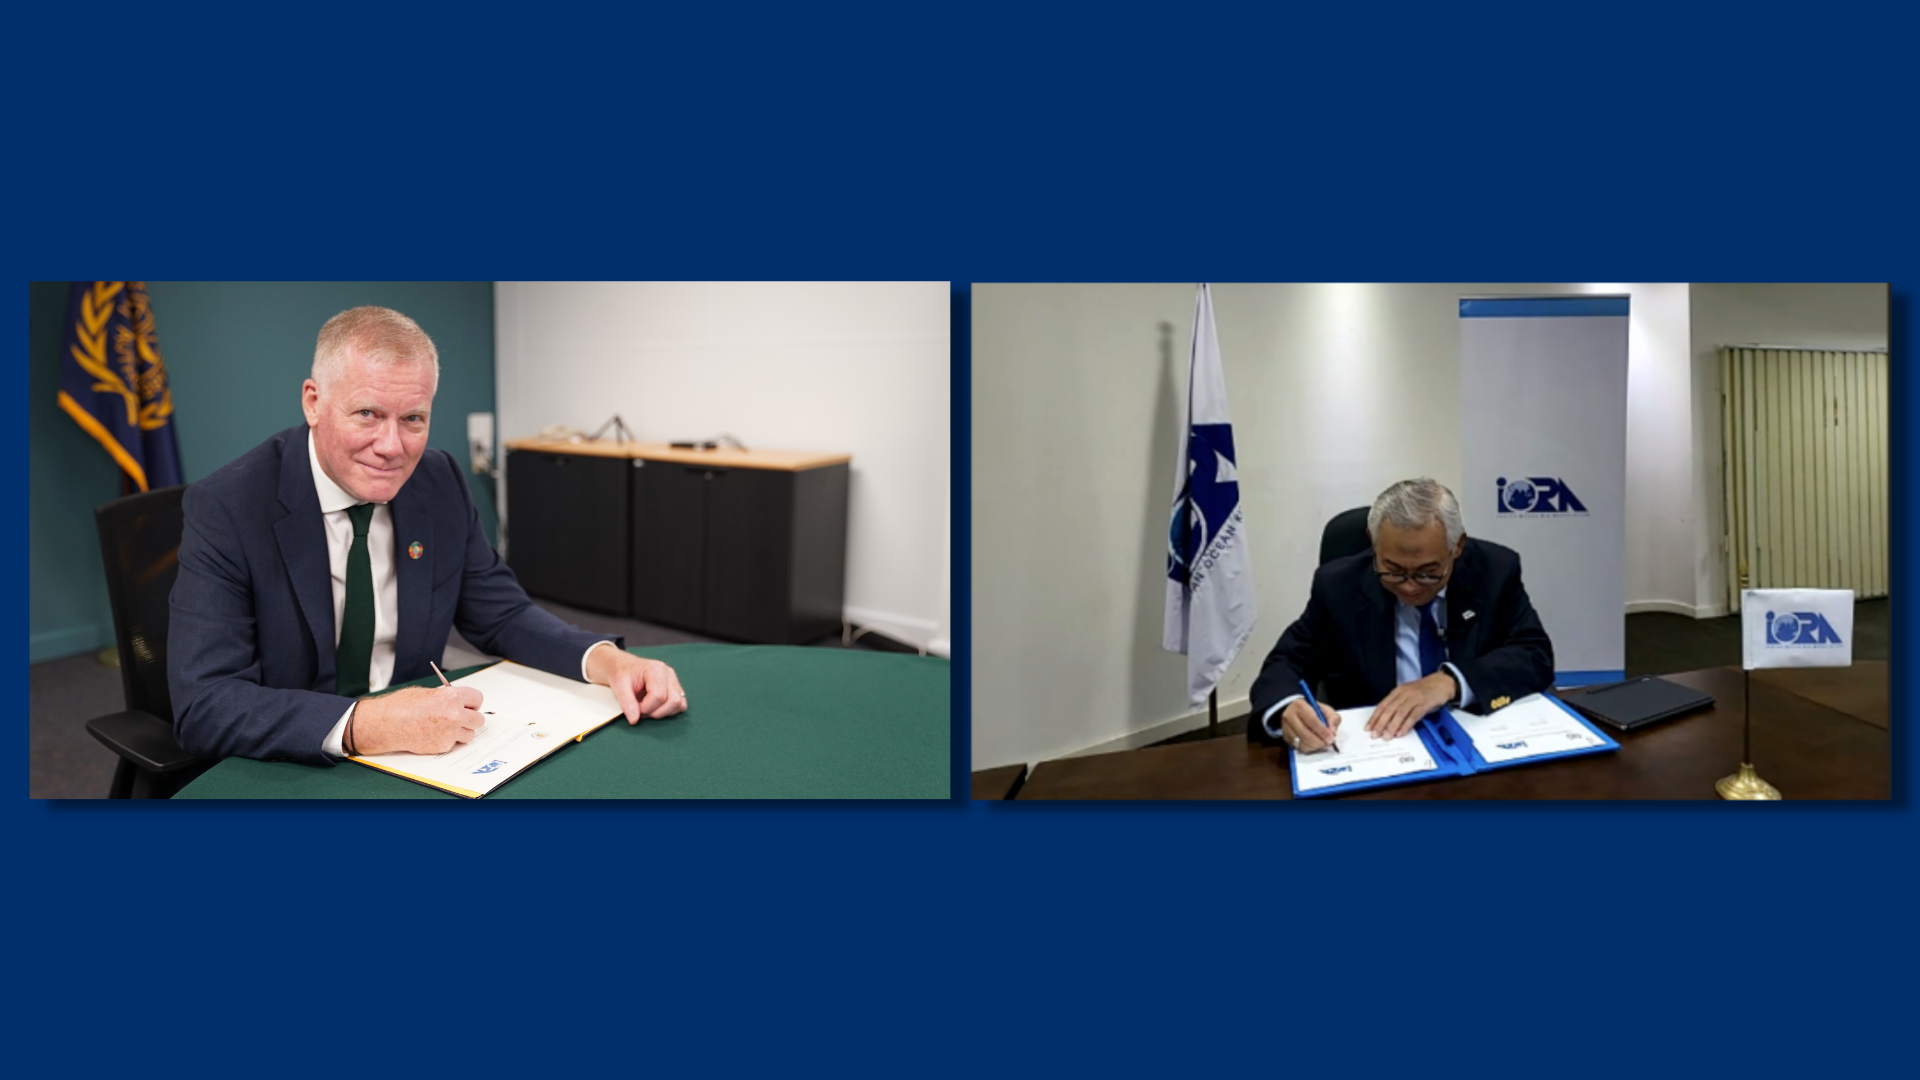 ISA and IORA sign MoU to expand collaboration in marine scientific research and deep-seabed exploration in support of the blue economy of the Indian Ocean region